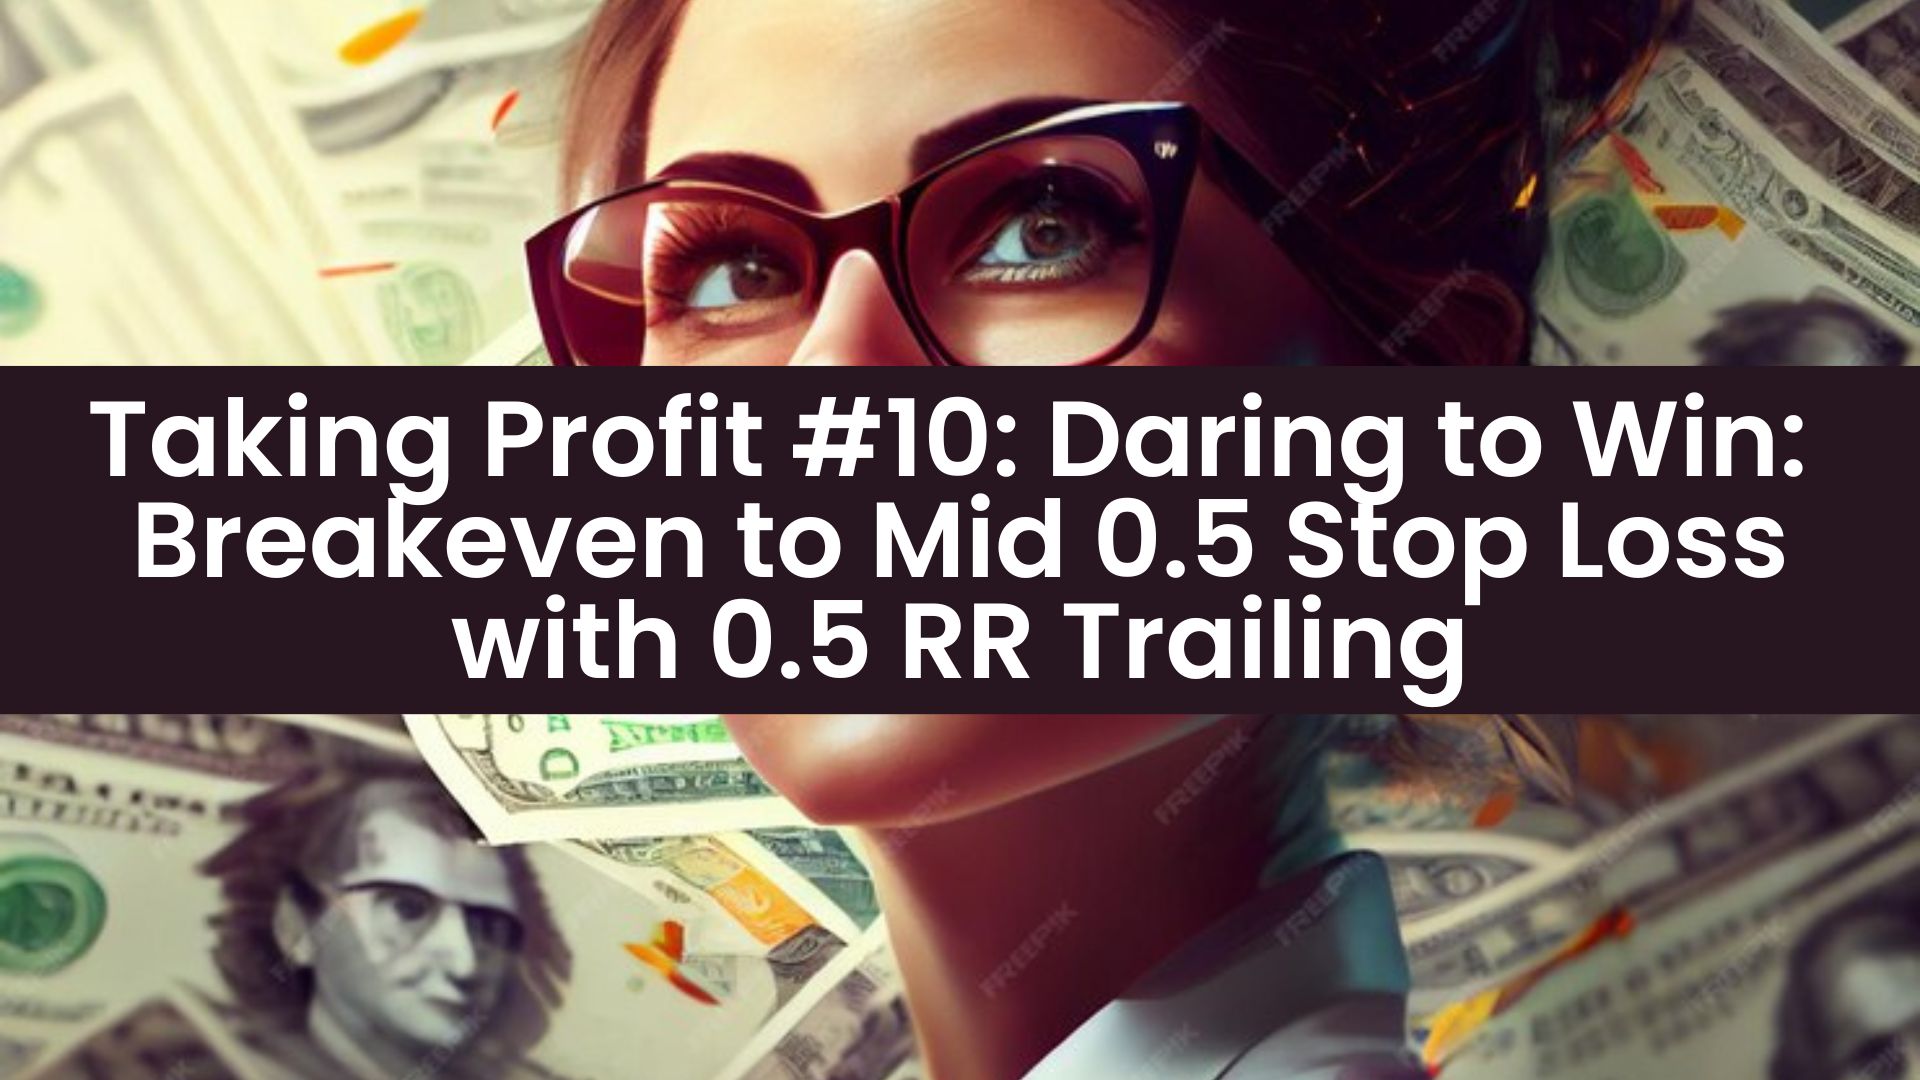 Trading Algorithm #10 Daring to Win Exploring Breakeven to Mid 0.5 Stop Loss with 0.5 RR Trailing